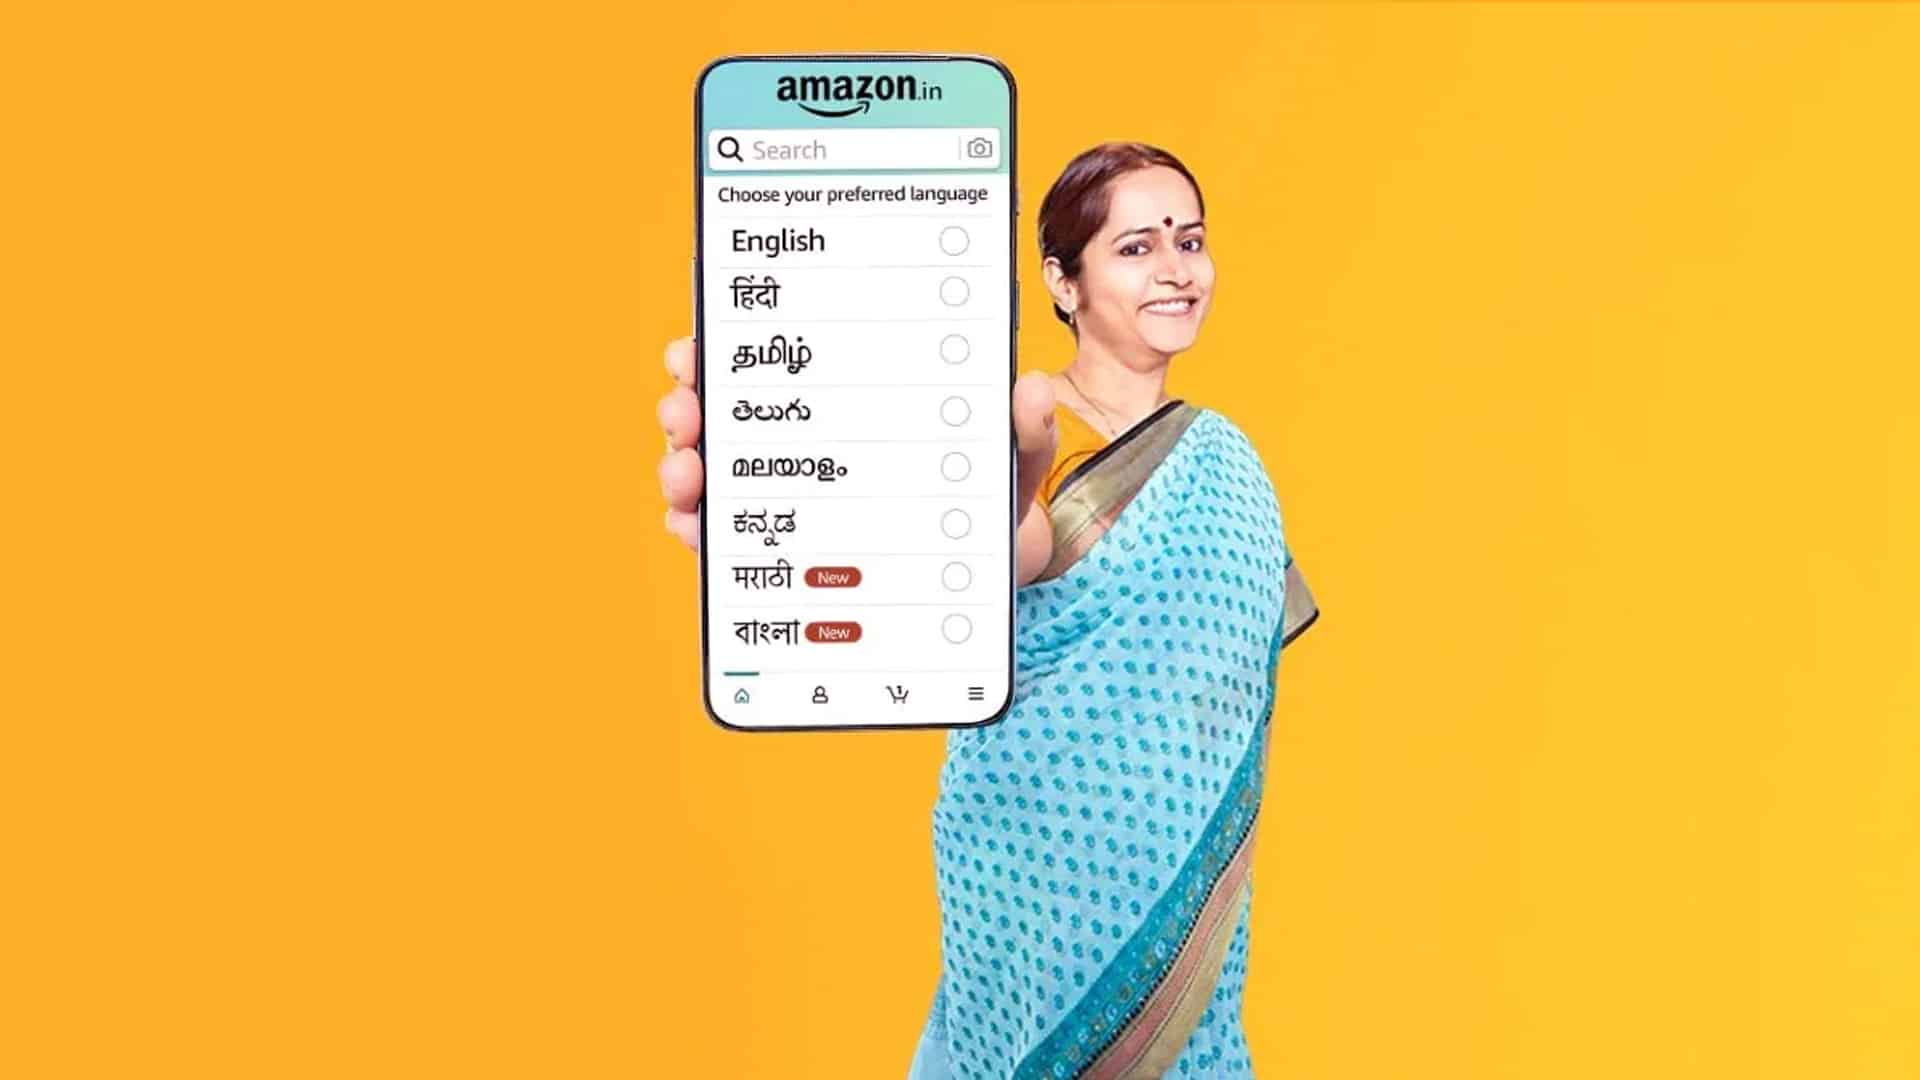 Amazon India will soon let its users shop in Hindi